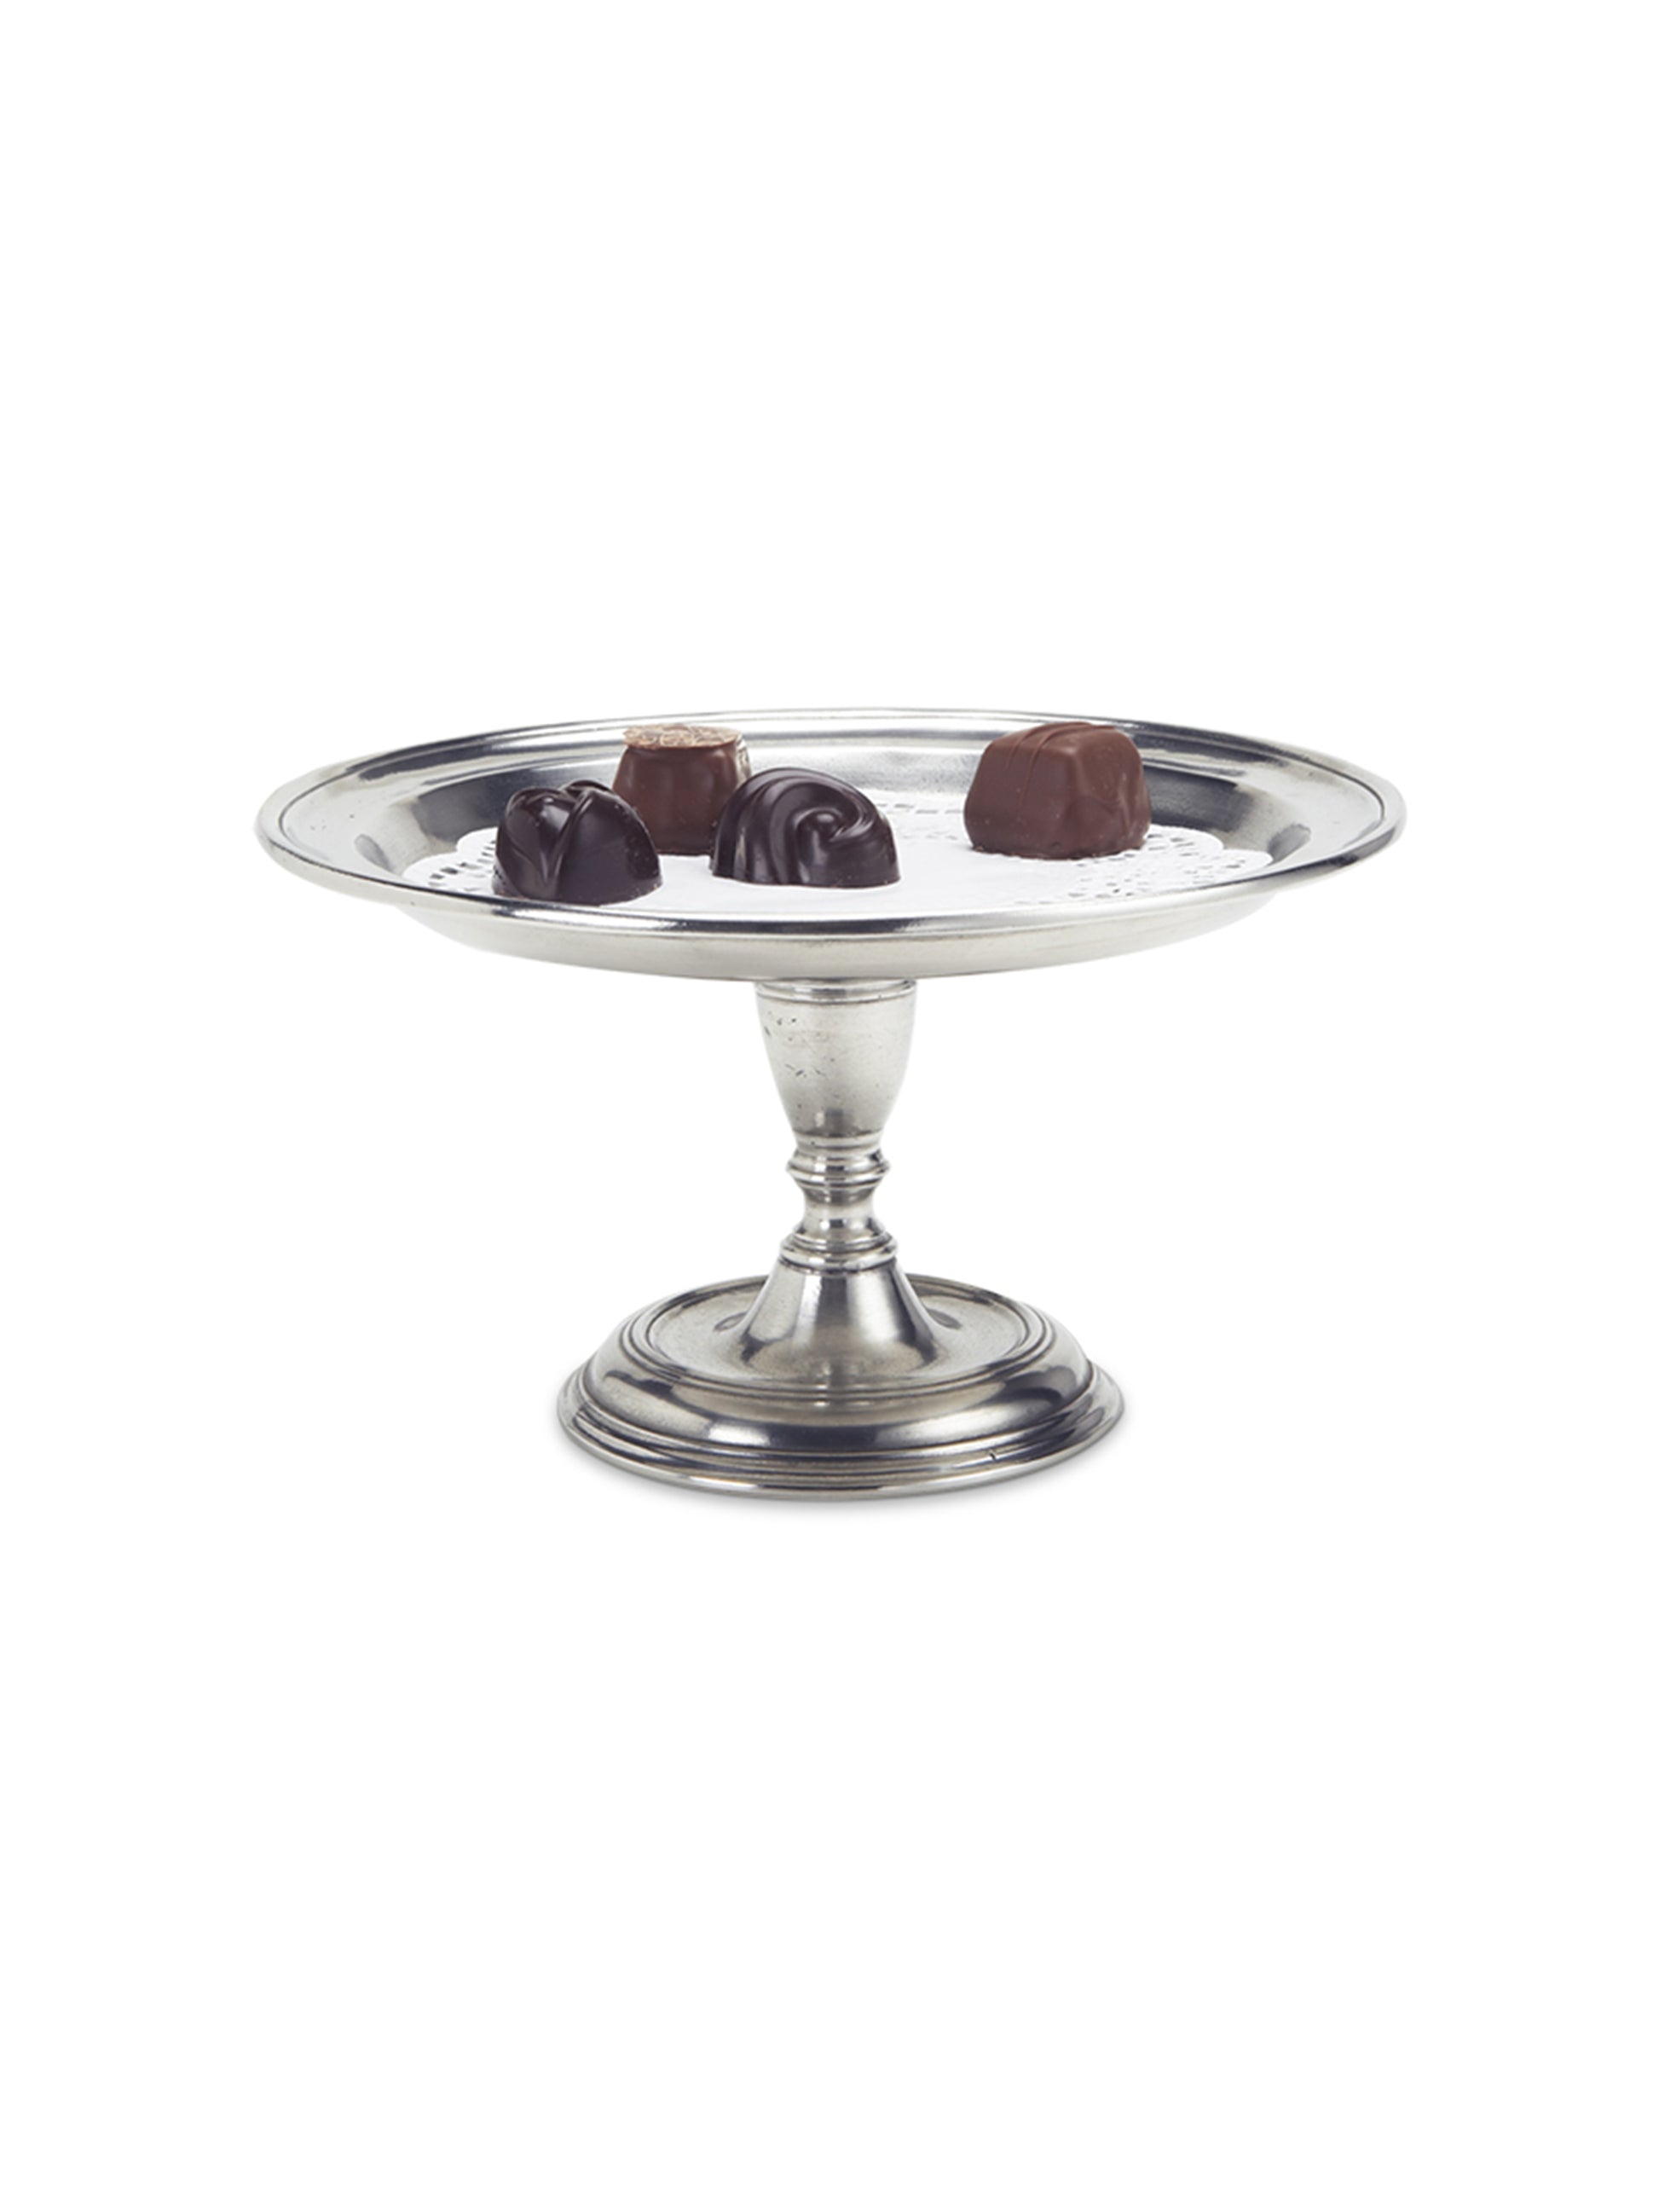 MATCH Pewter Small Pedestal Tray Weston Table